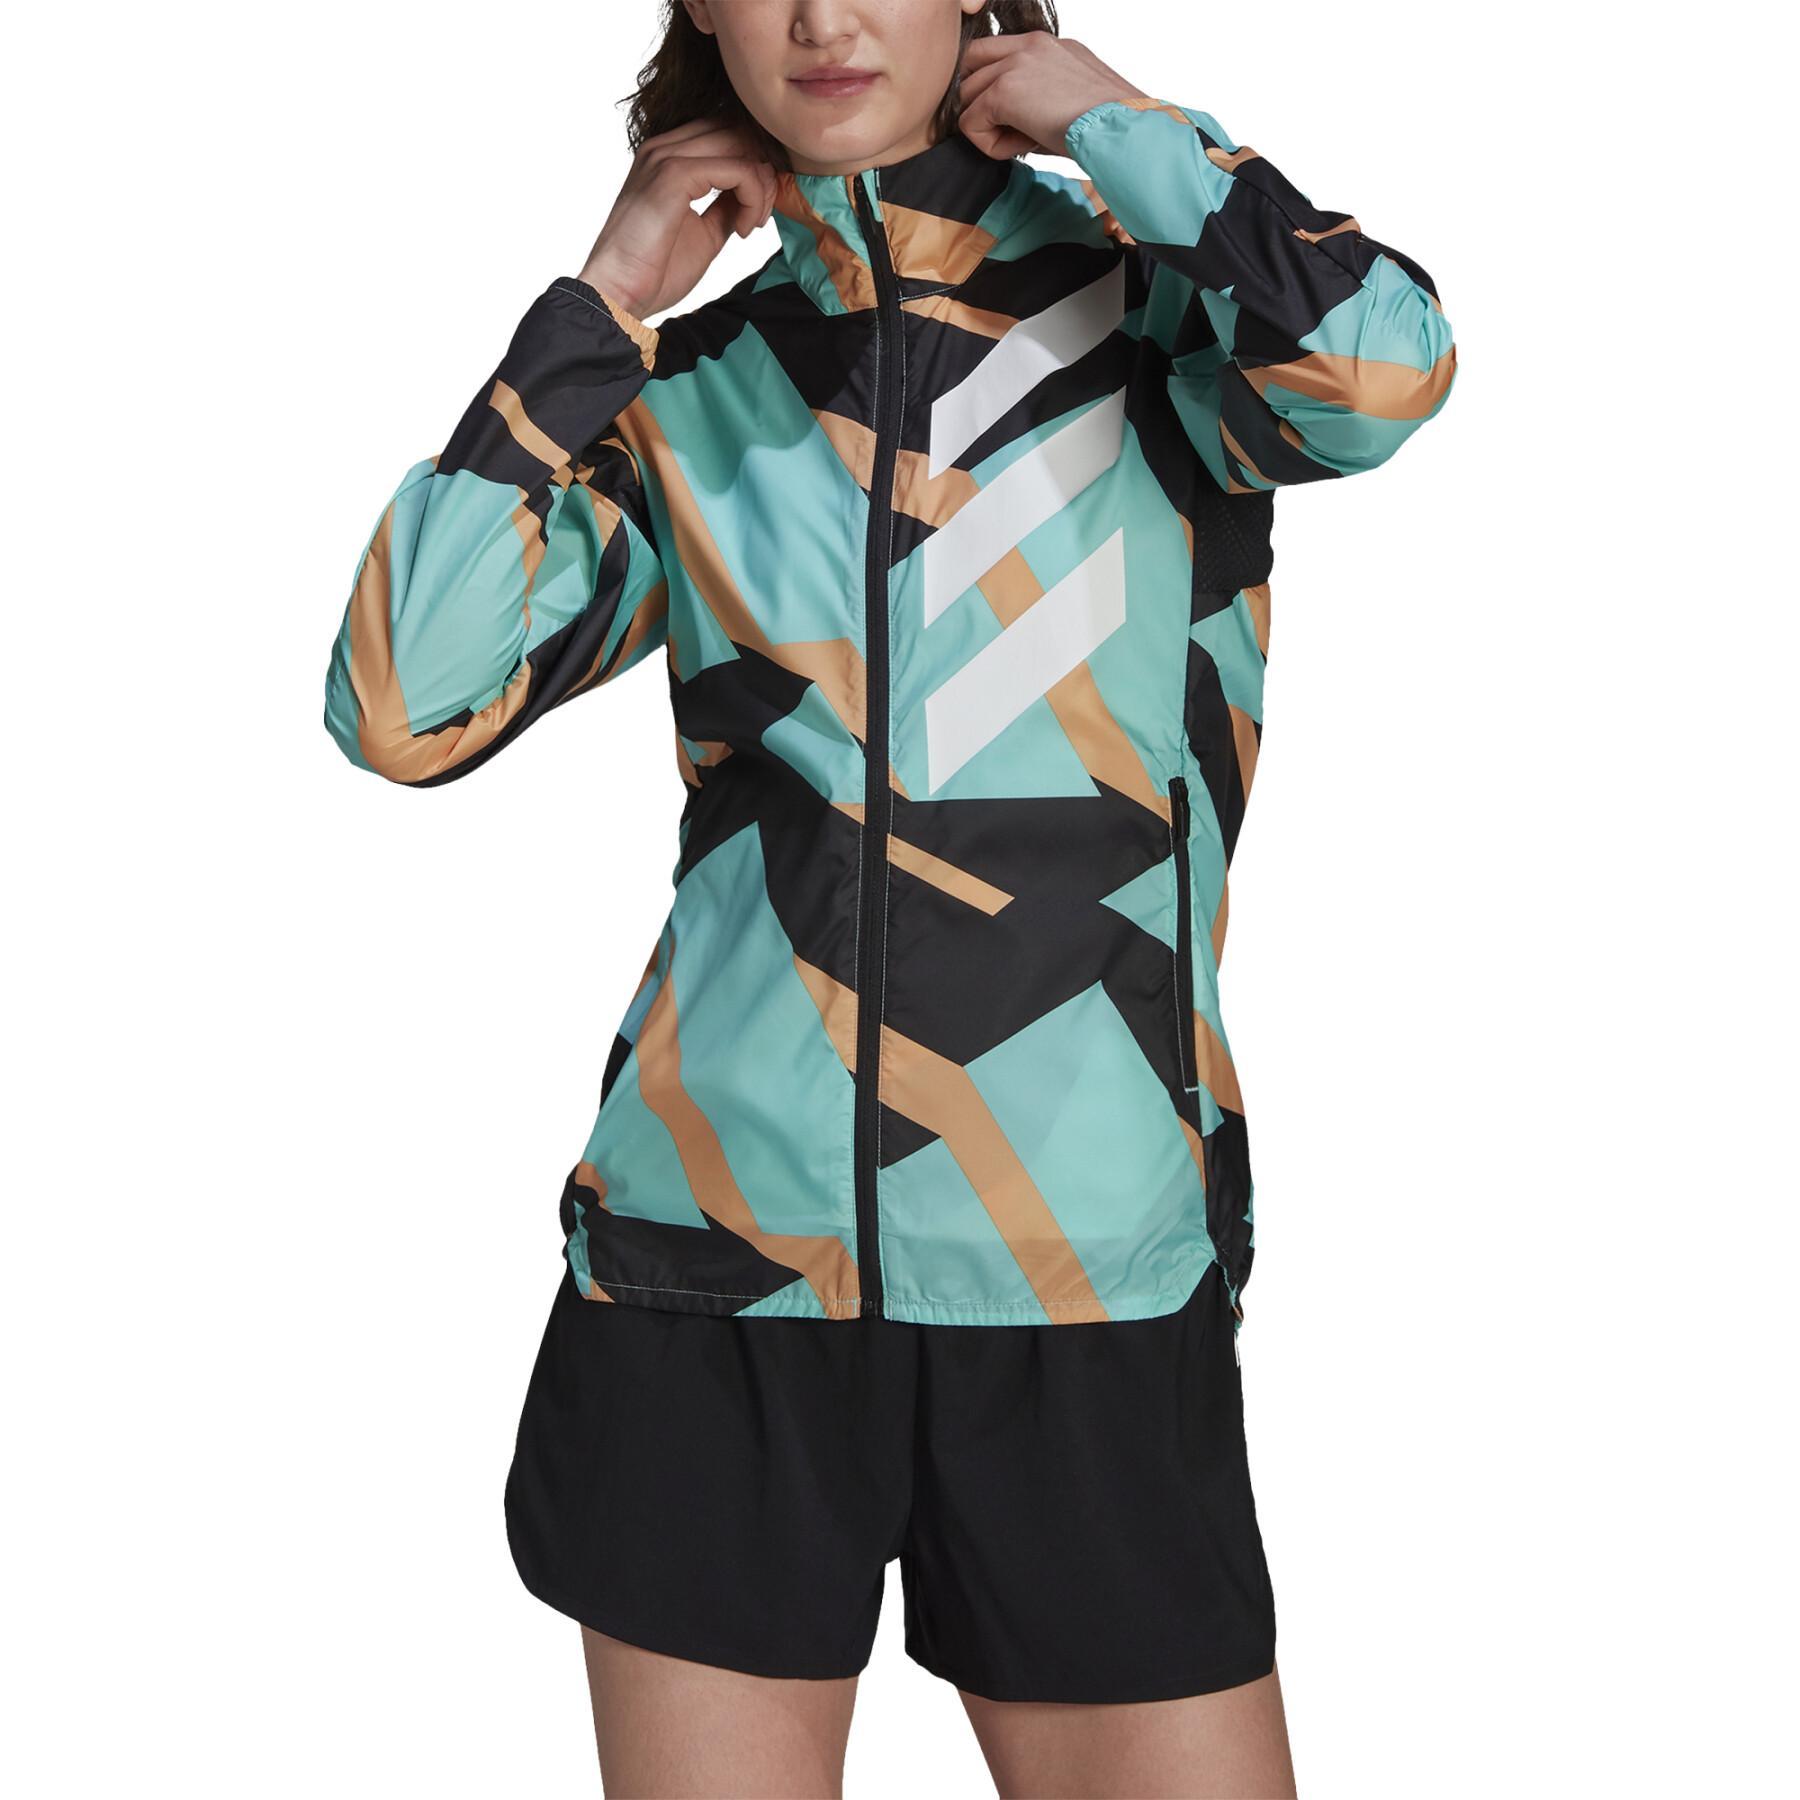 Veste coupe-vent femme adidas Terrex Parley Agravic Trail Running